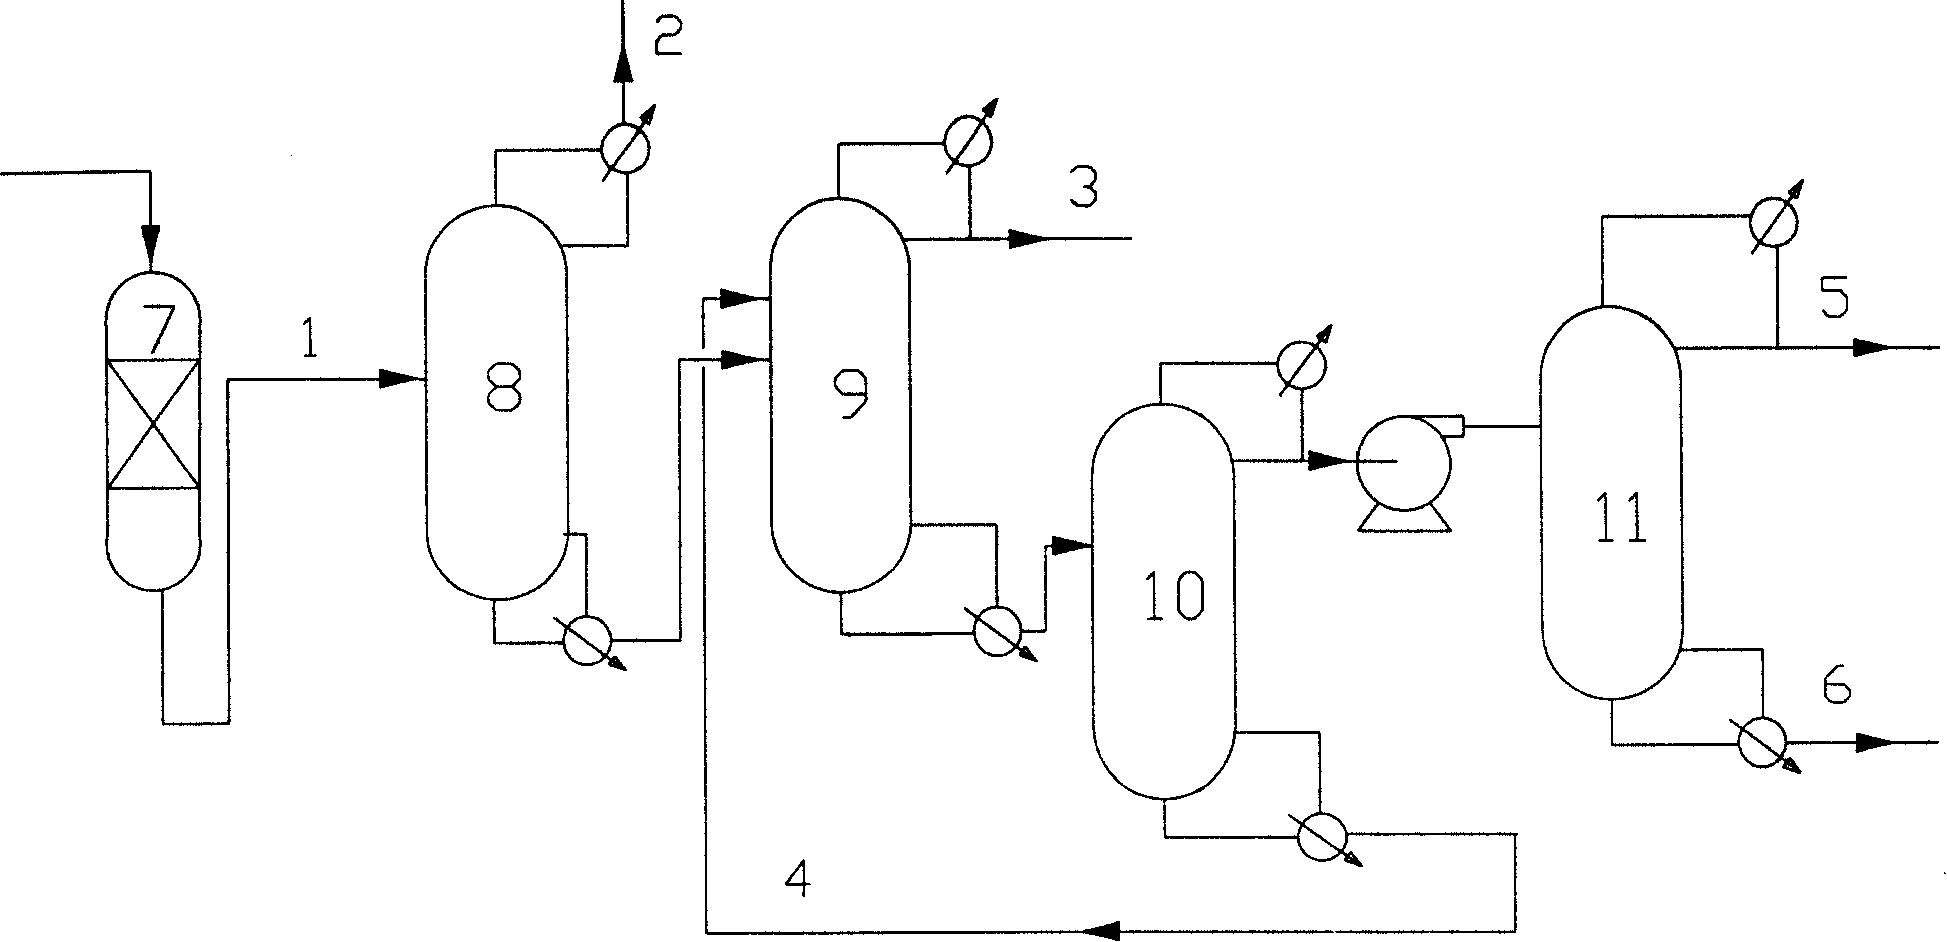 Extraction method for a segment of butadiene with NMP method